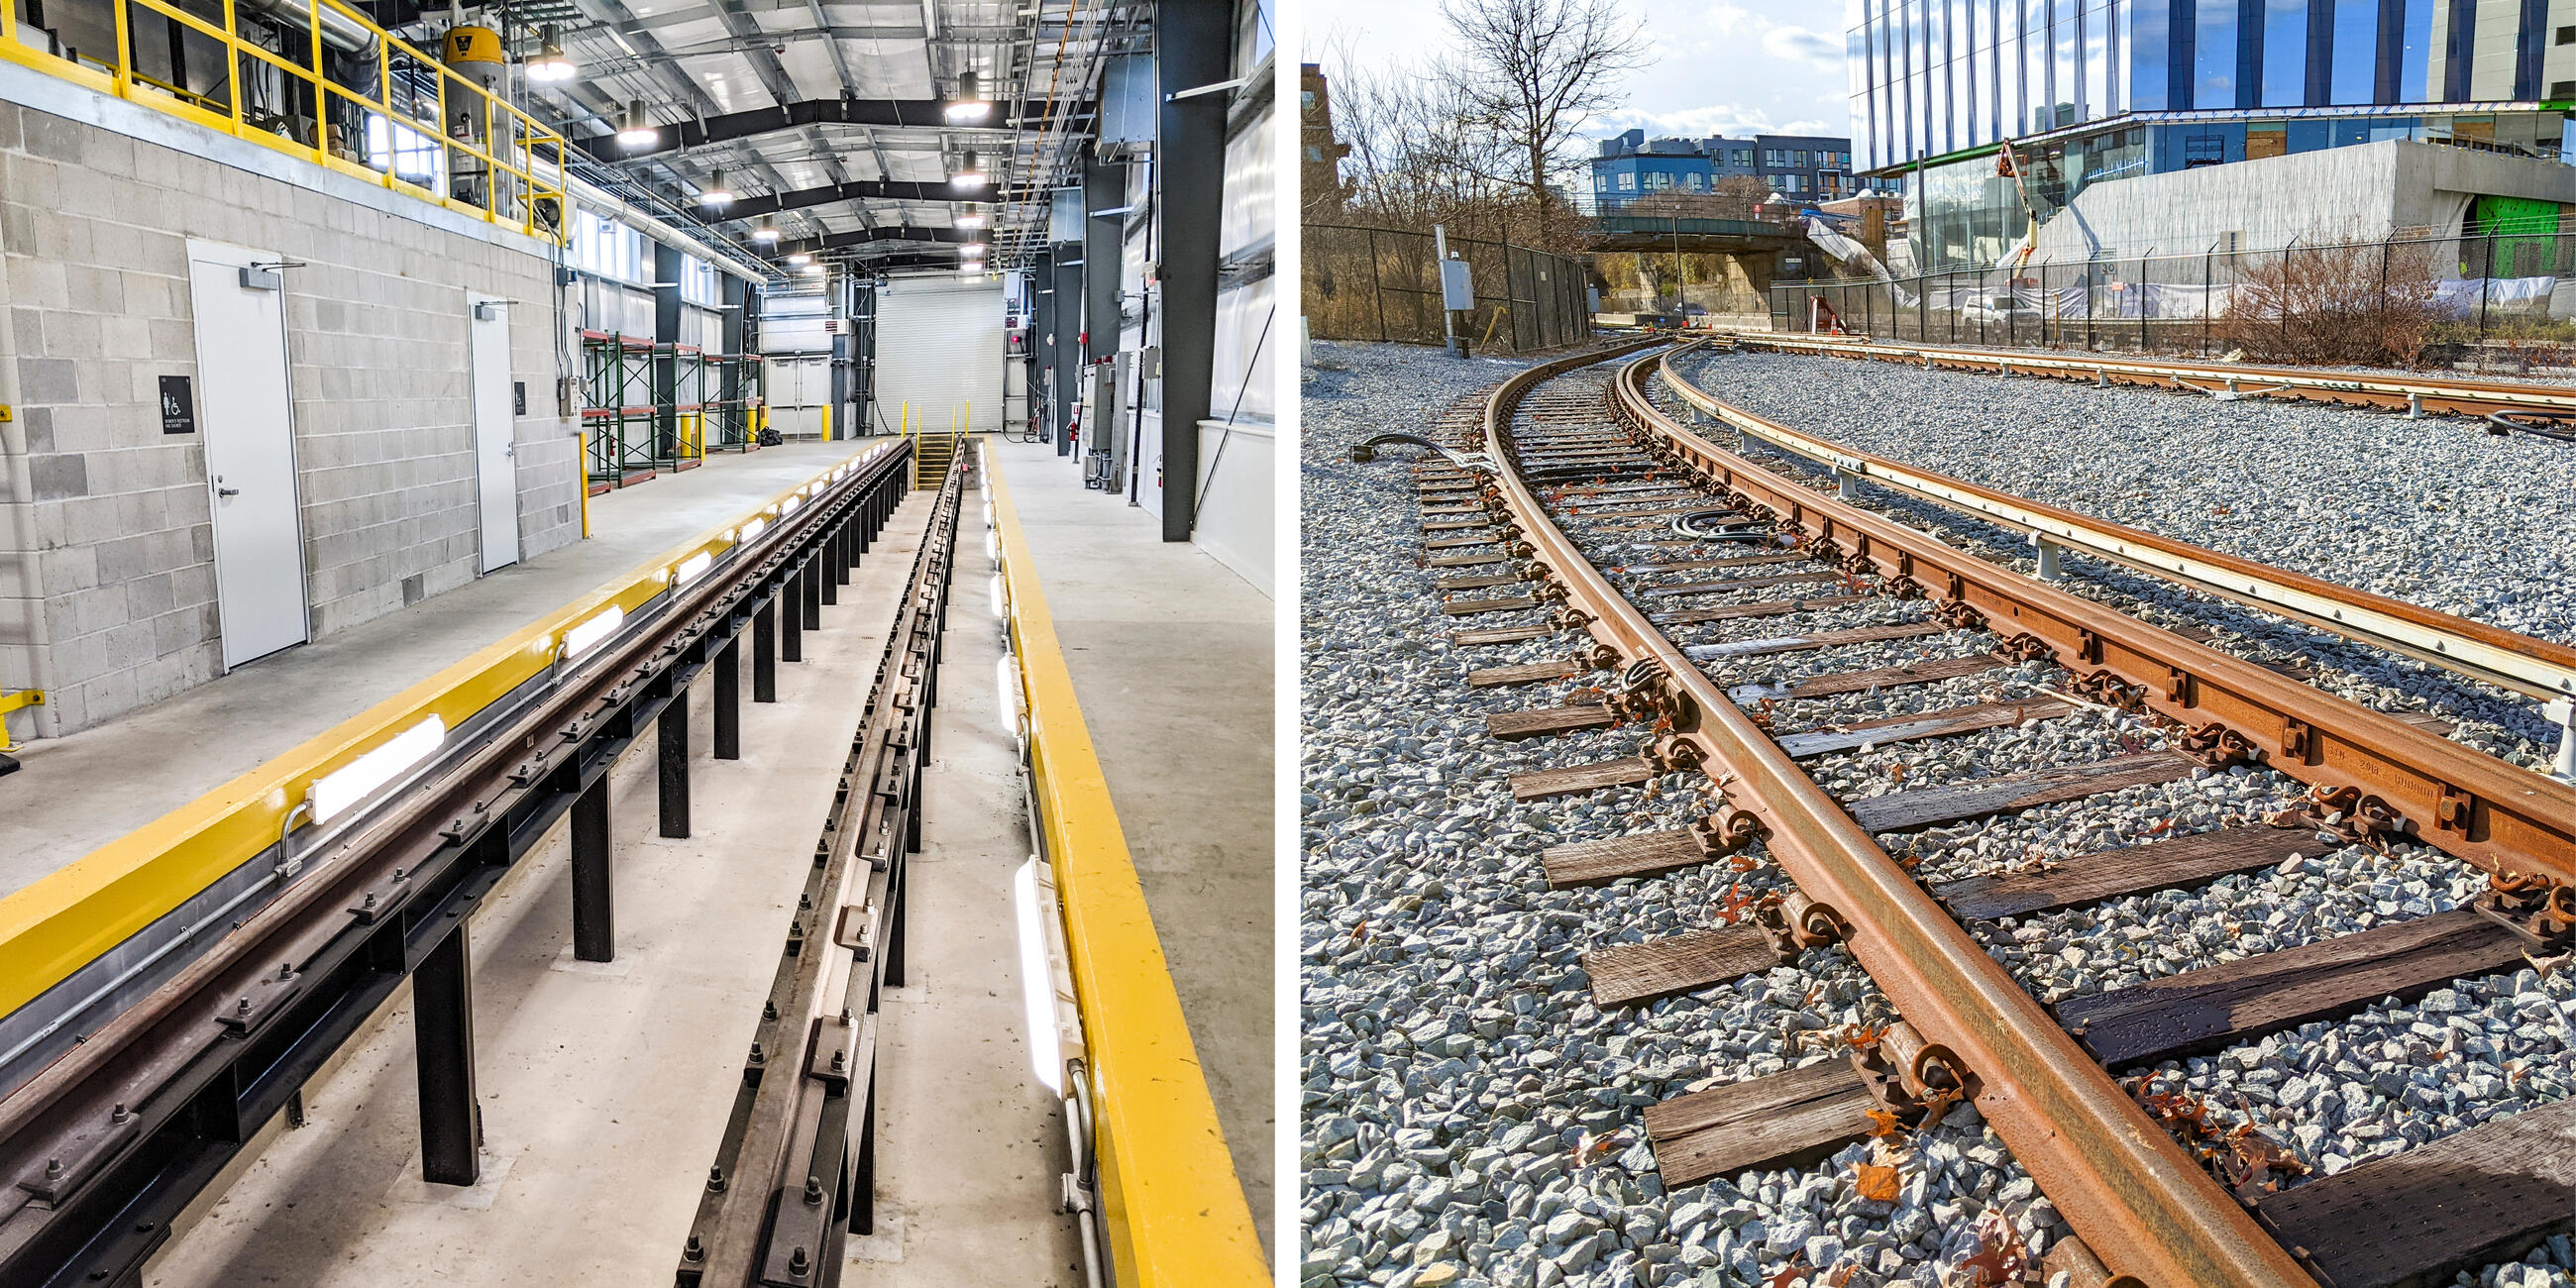 A photo of the inside of the new vehicle testing facility next to a photo of the test tracks outside